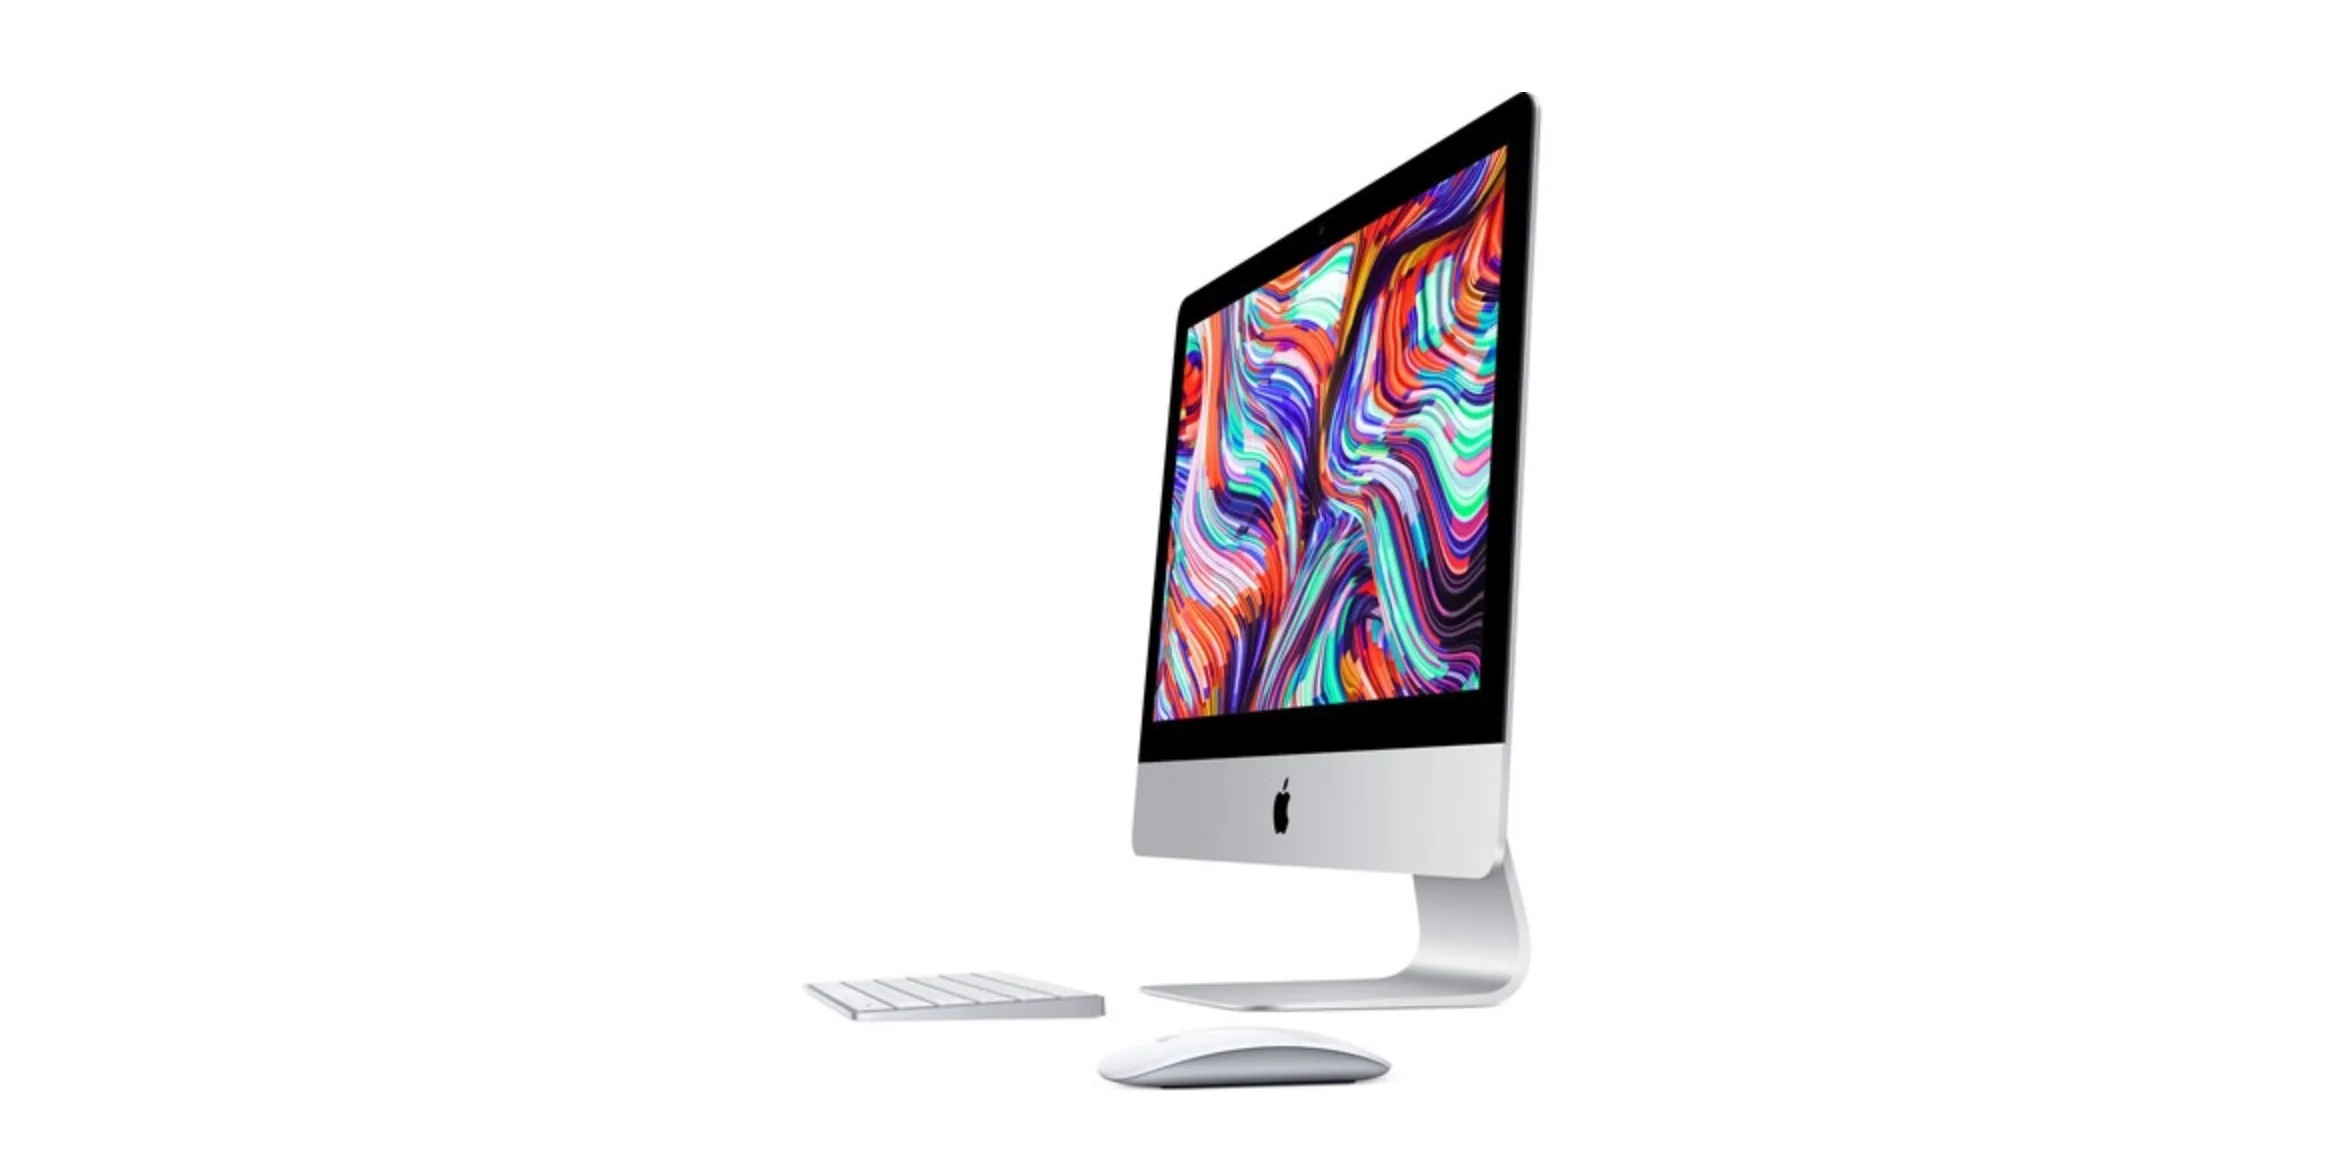 Autonoom geweten klif Apple discontinues 21.5-inch Intel iMac as Apple SIlicon transition  continues - 9to5Mac